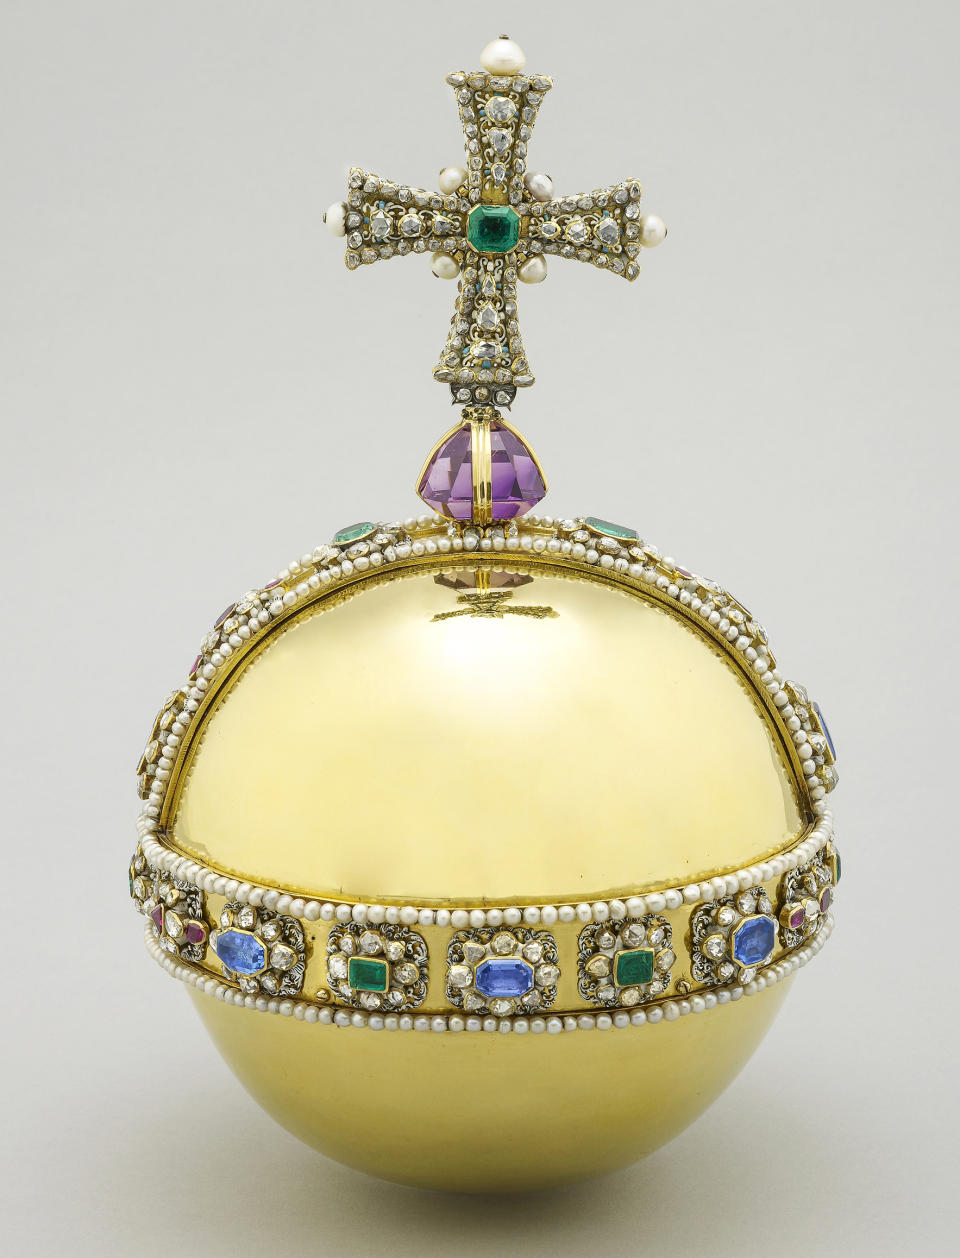 The Sovereign’s Orb. (Royal Collection Trust / His Majesty King Charles III 2023)